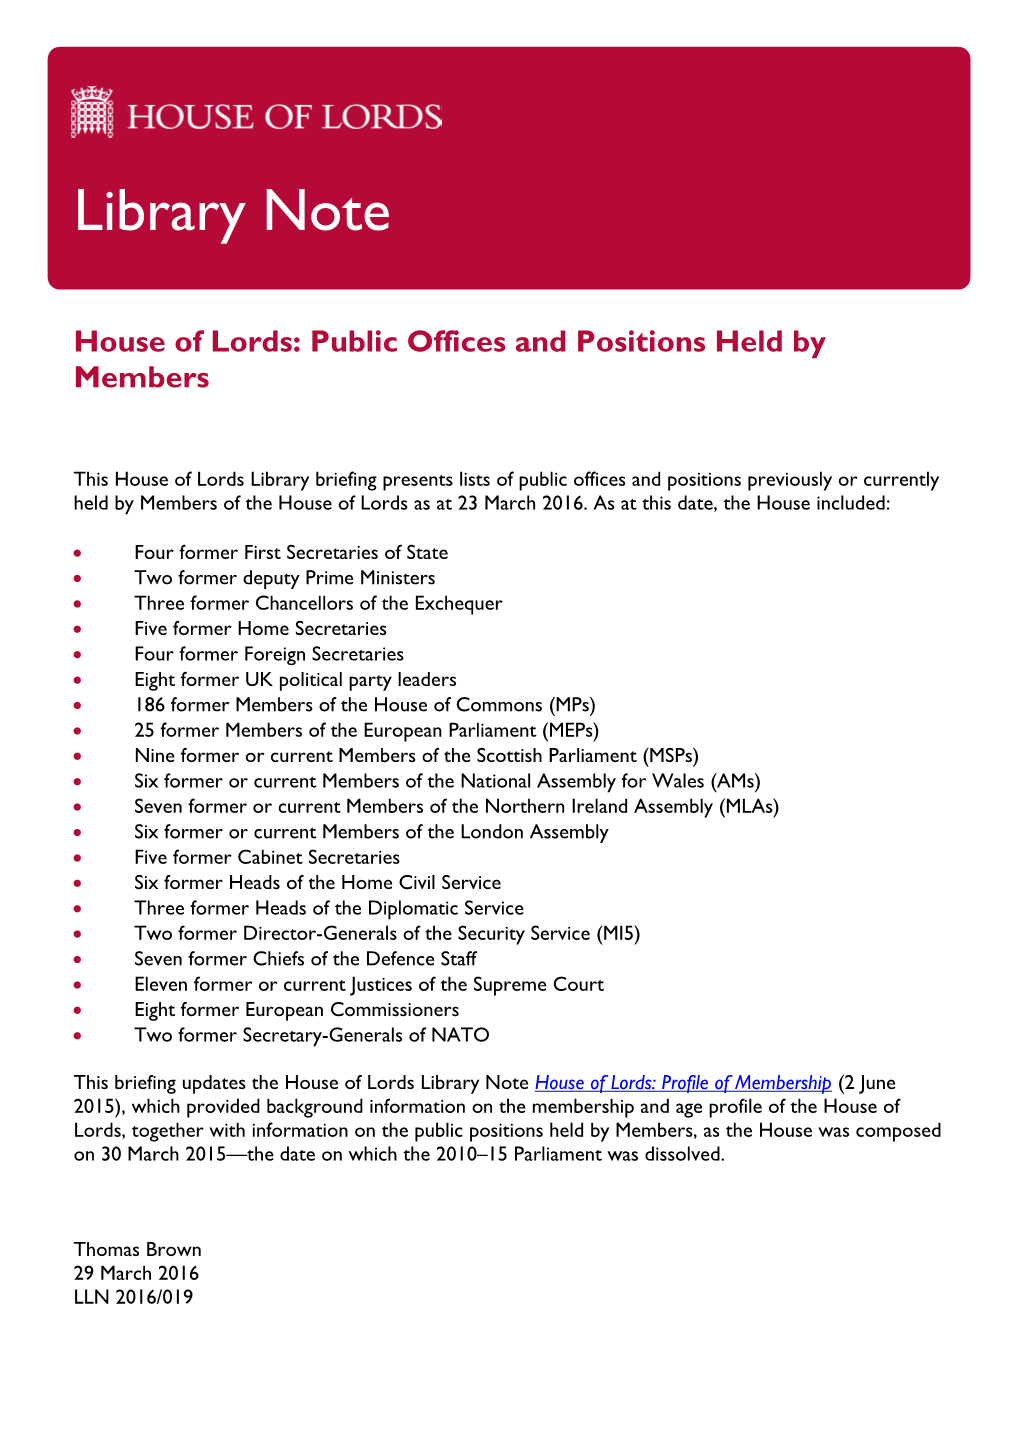 House of Lords: Public Offices and Positions Held by Members